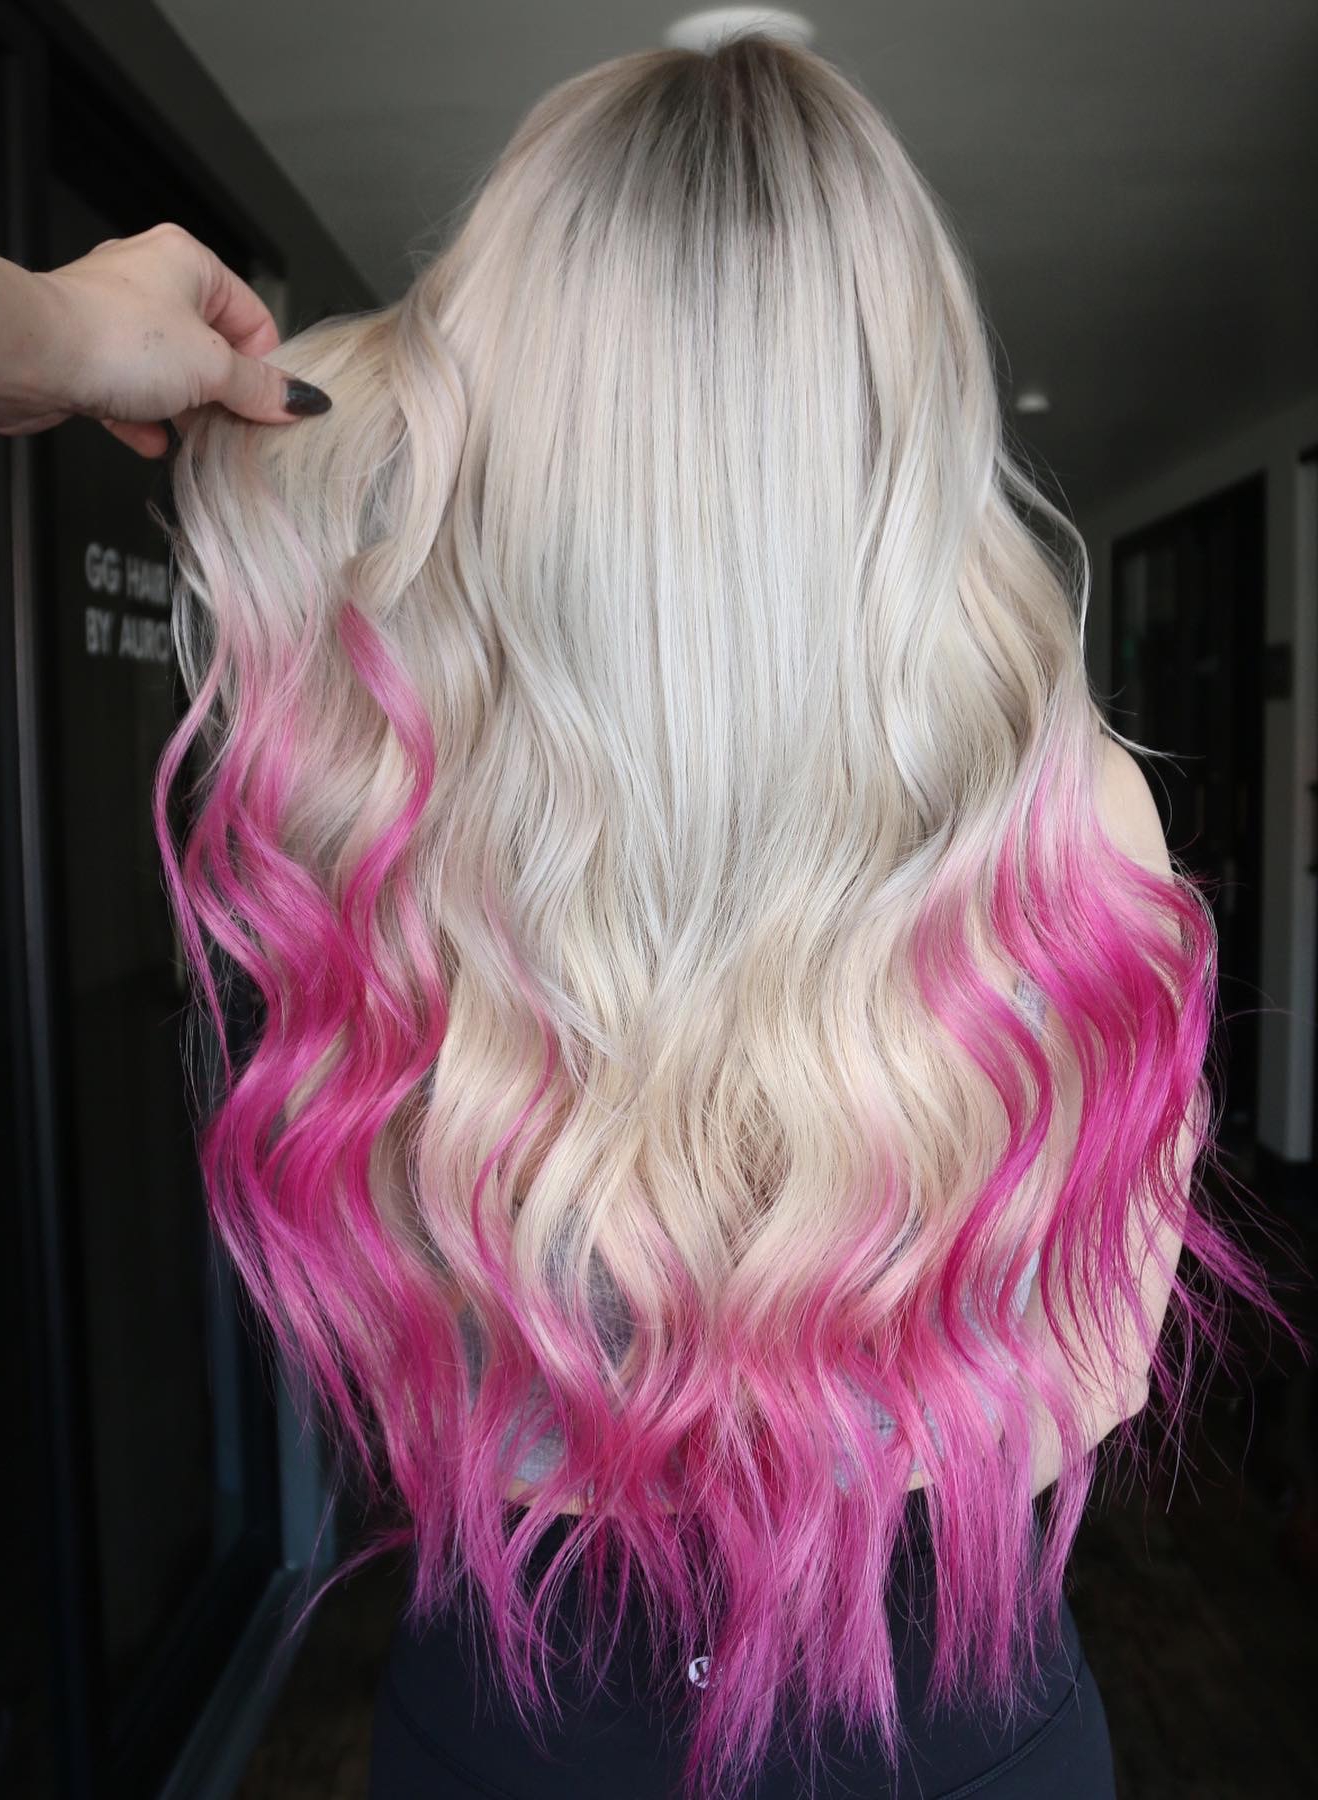 Long Blonde Hair with Pink Ends